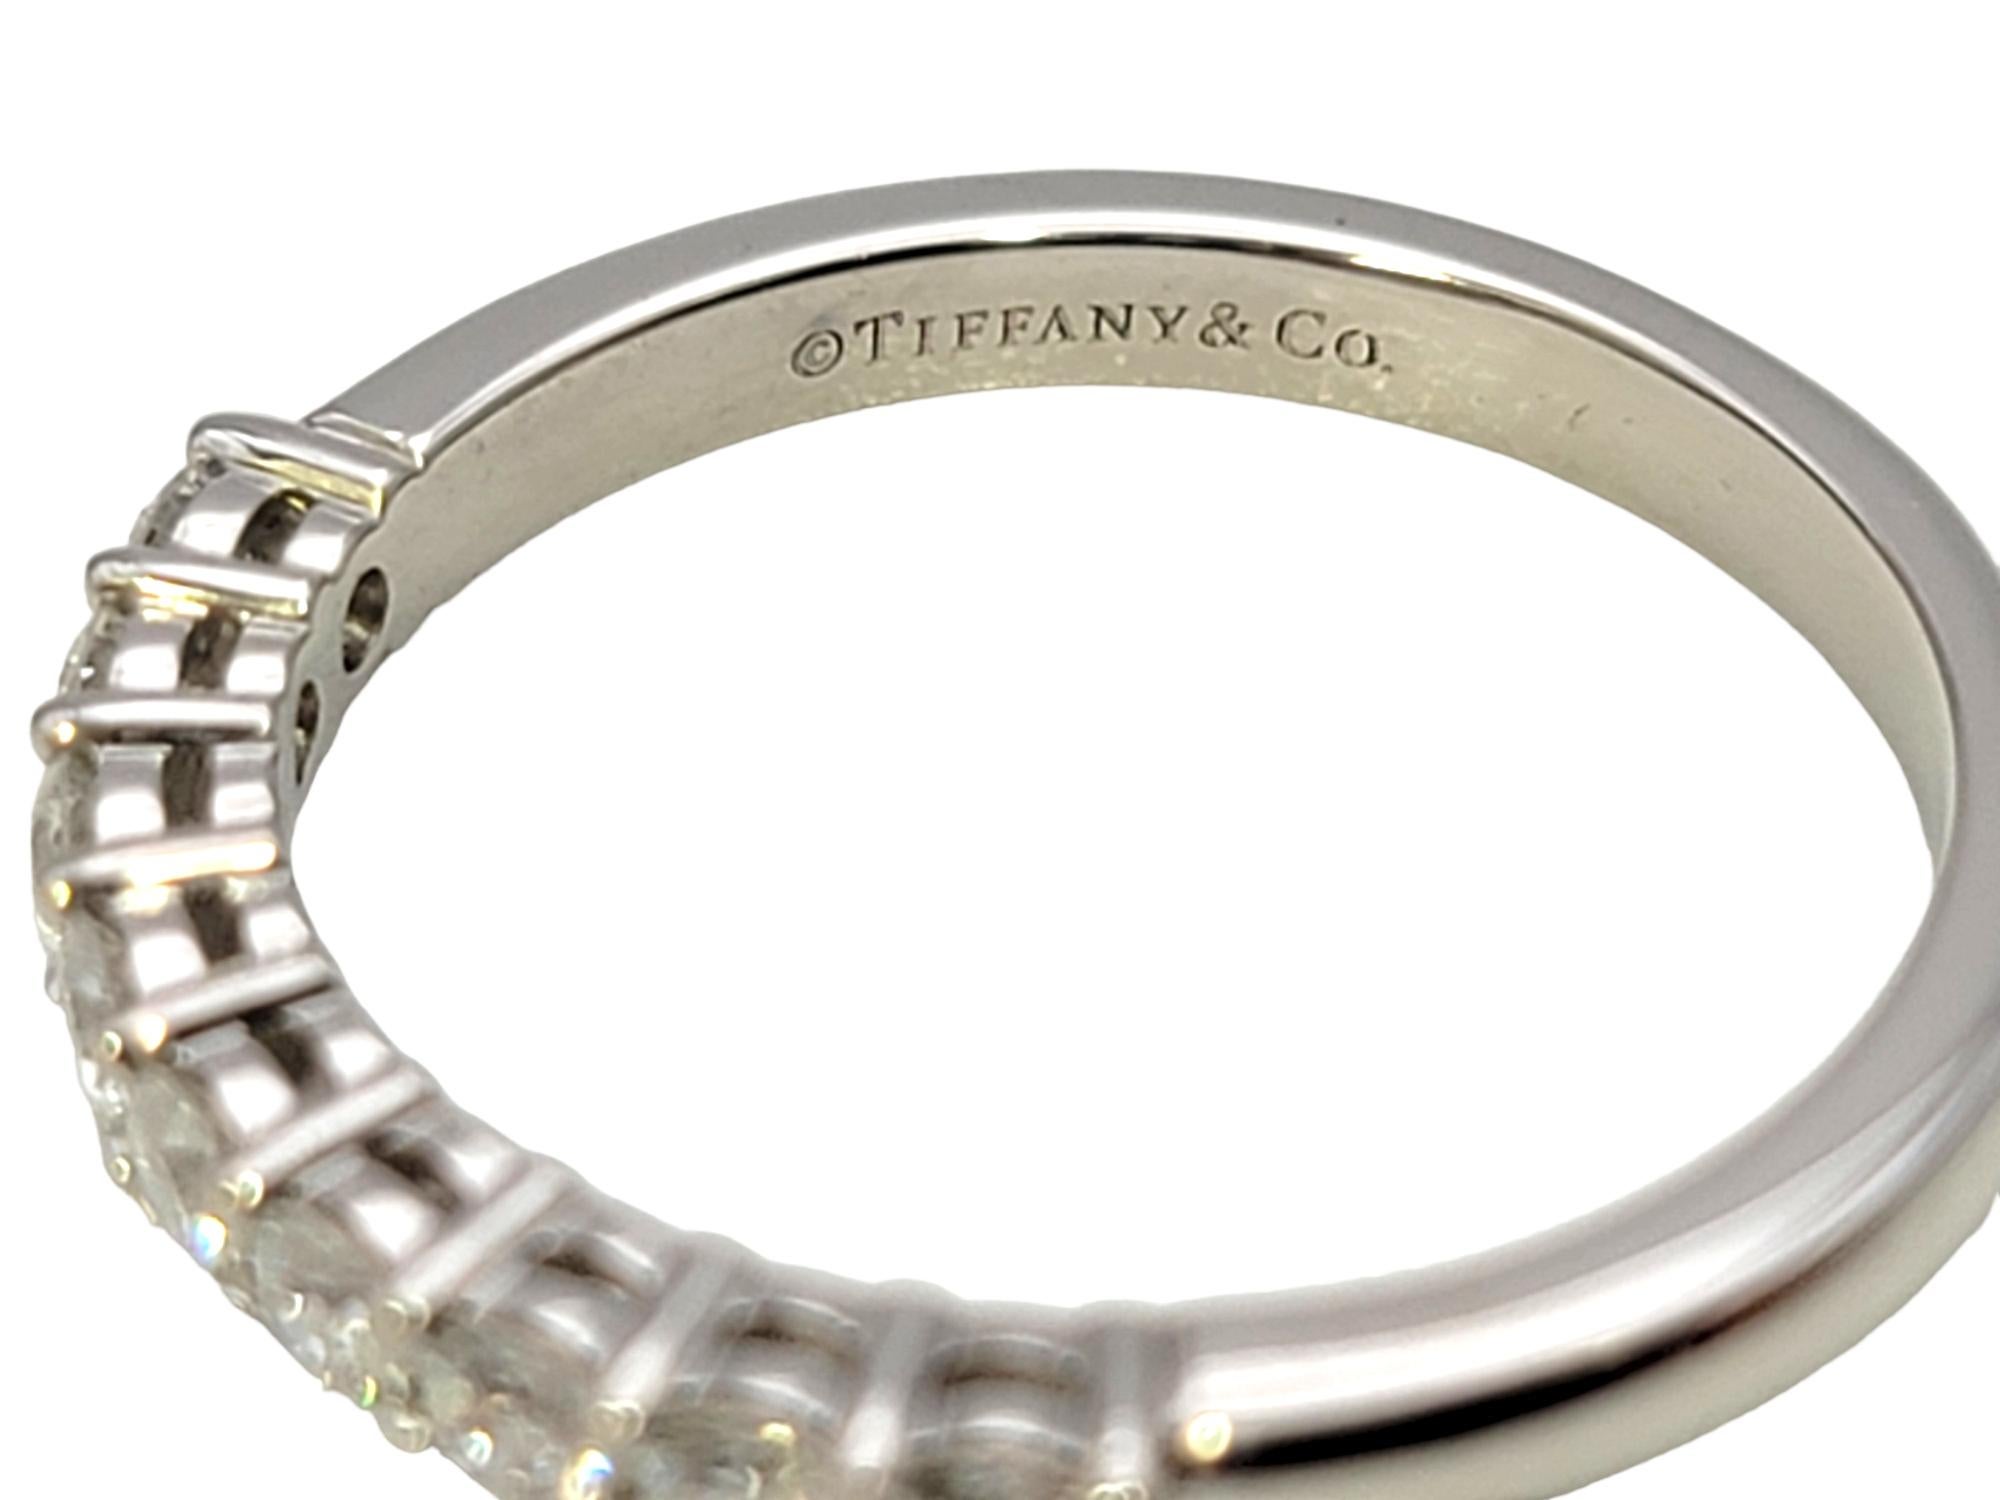 Tiffany & Co. Forever Semi Eternity Diamond Wedding Band Ring Platinum 4.5 In Excellent Condition For Sale In Scottsdale, AZ